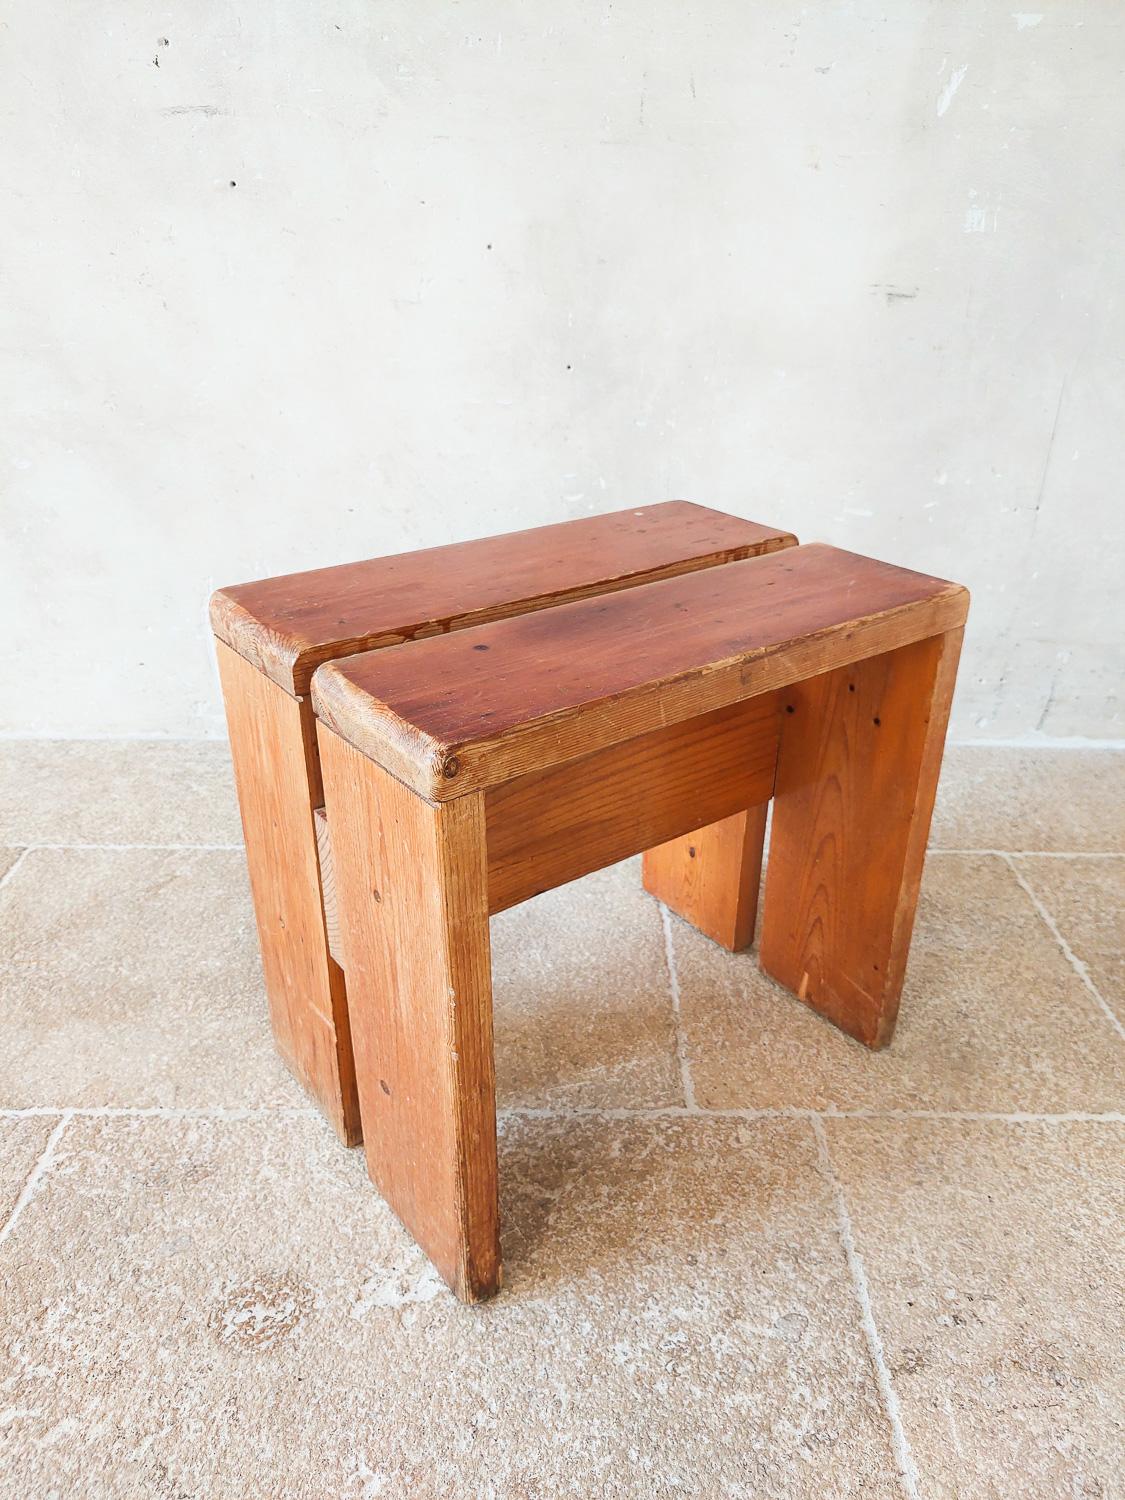 Charlotte Perriand Pine Wood Stool for Les Arcs, 1960s For Sale 1